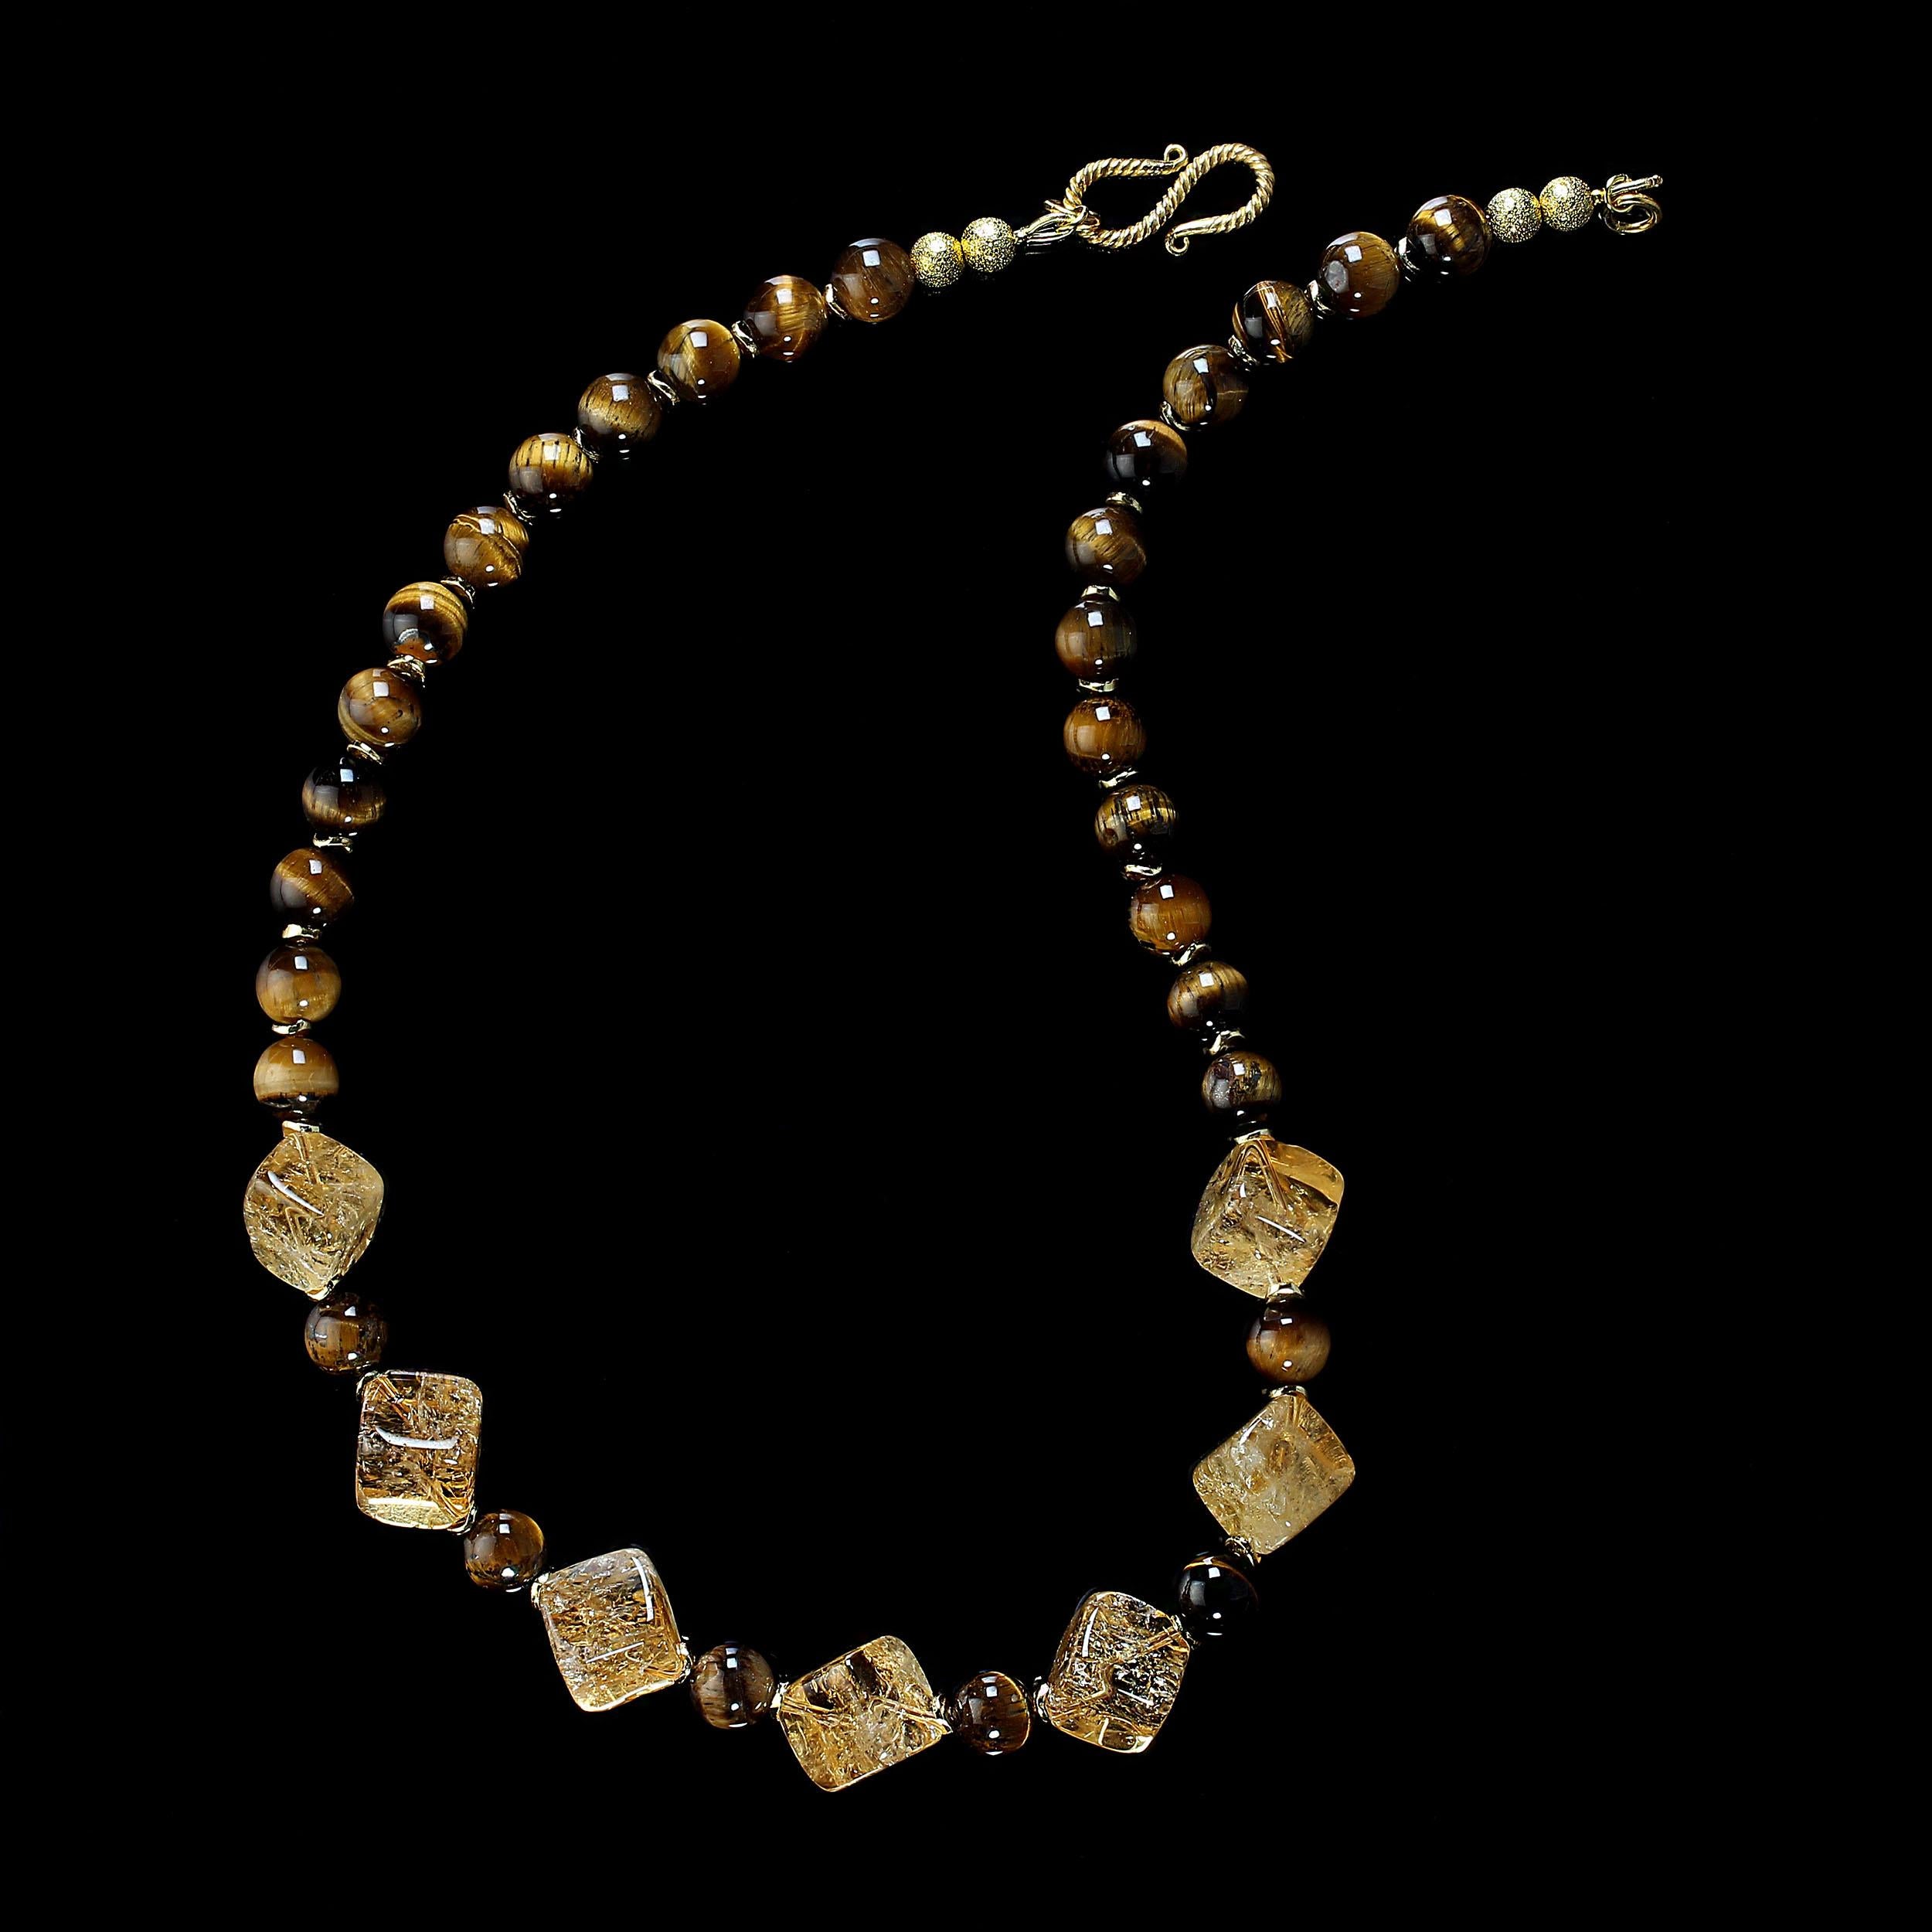 18-Inch Unique golden citrine and tiger's eye necklace.  This one-of-a-kind necklace features beautifully cut bias drilled citrines, 12mm, and glowing, smooth 8mm tiger's eye. Gold tone flutters accent these elegant gemstones.  This necklace is